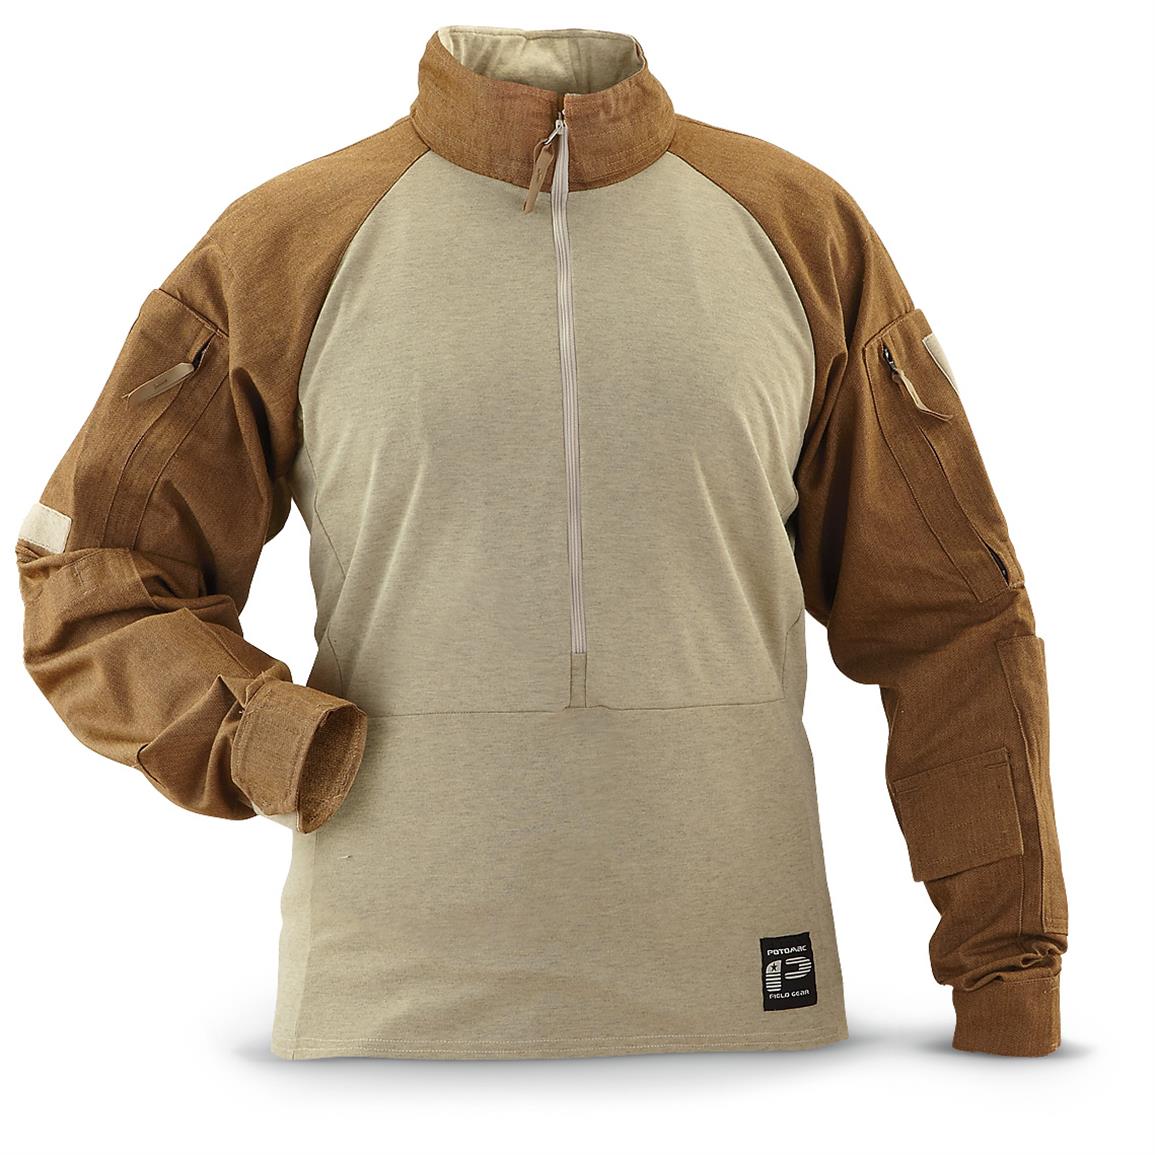 U.S. Military Surplus Nomex Combat Long-Sleeve Shirt, New - 609737, Shirts at Sportsman's Guide